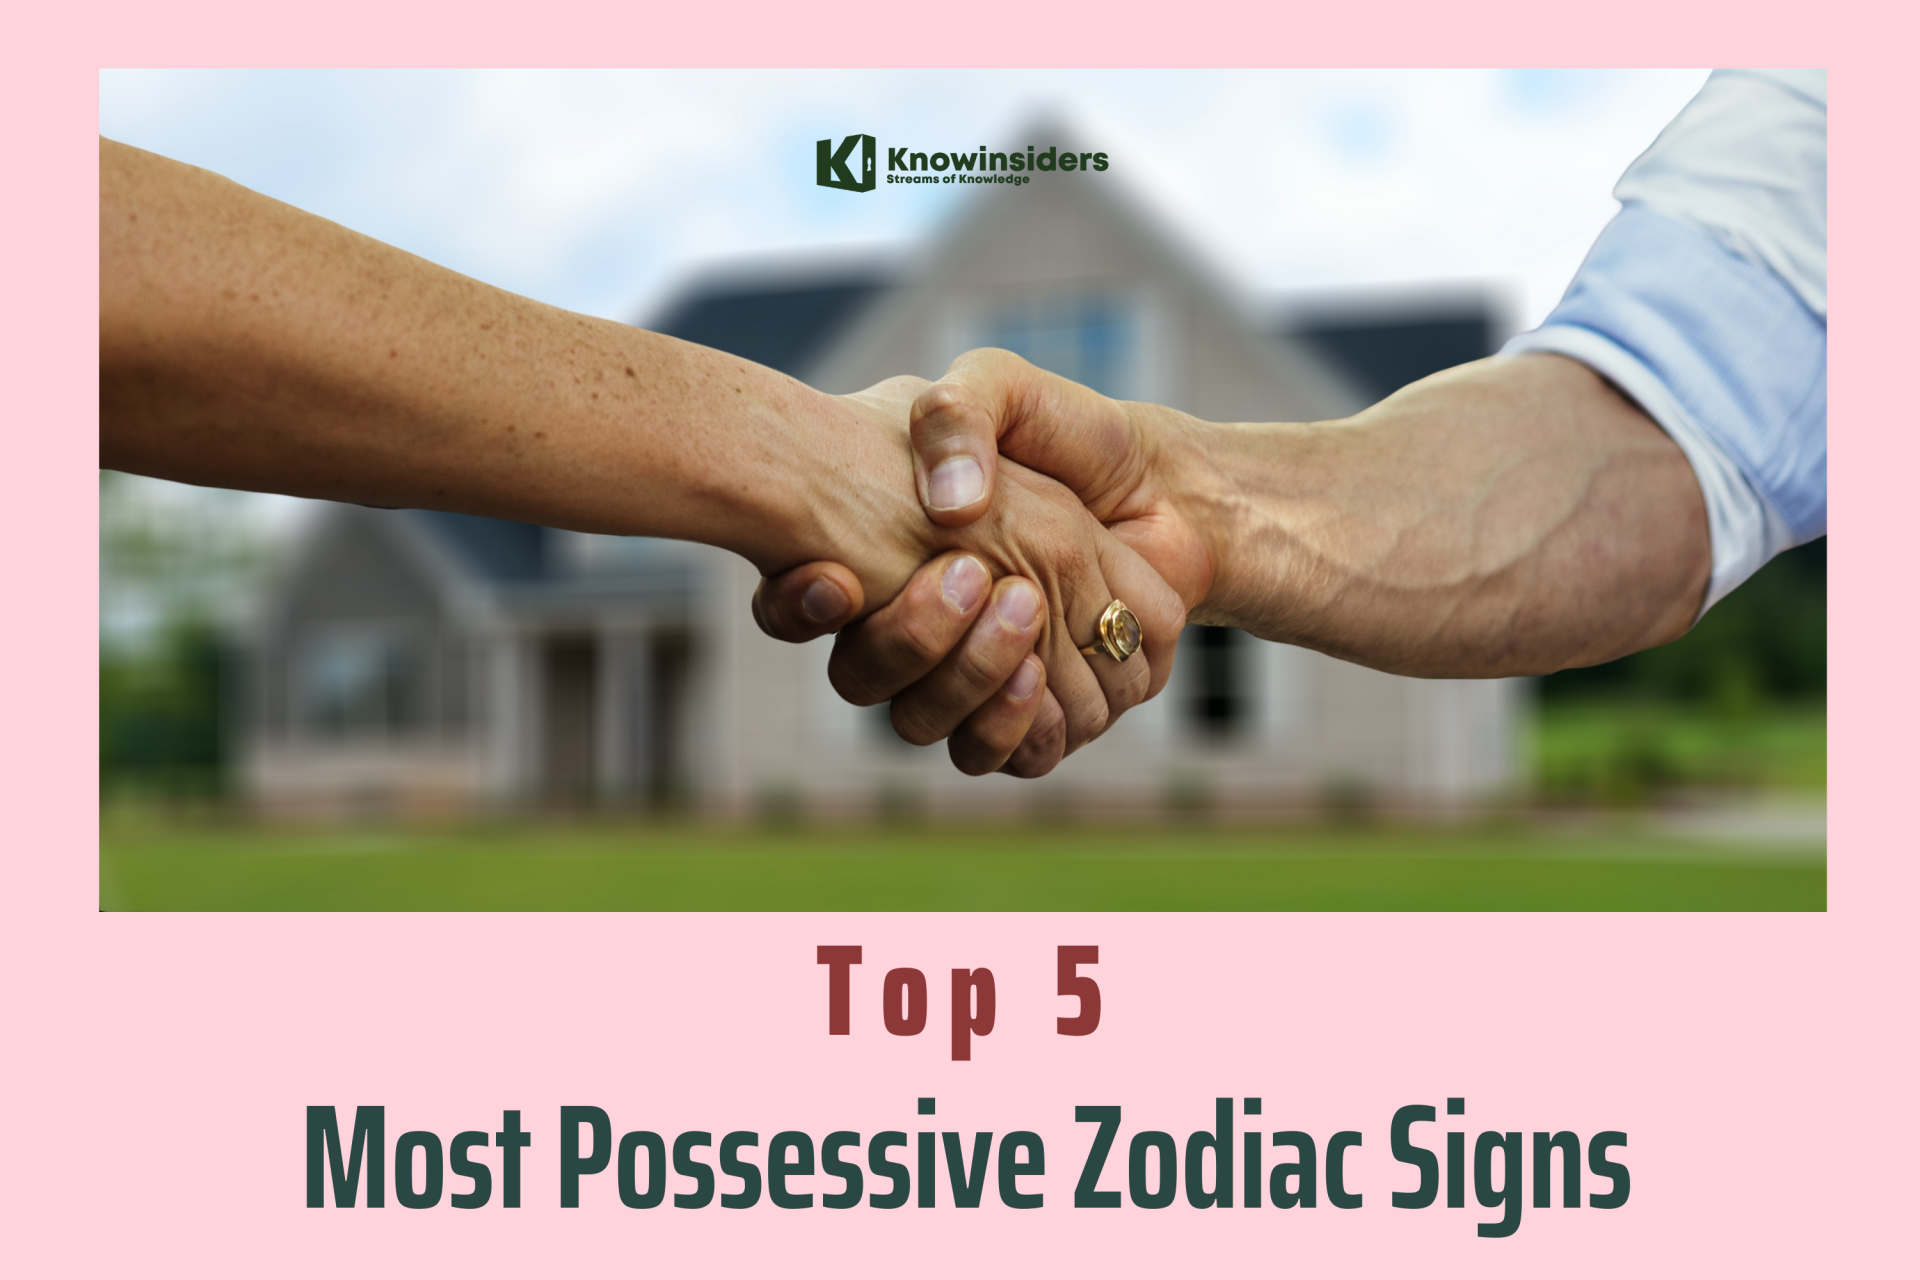 Top 5 Most Possessive Zodiac Signs - According to Astrology